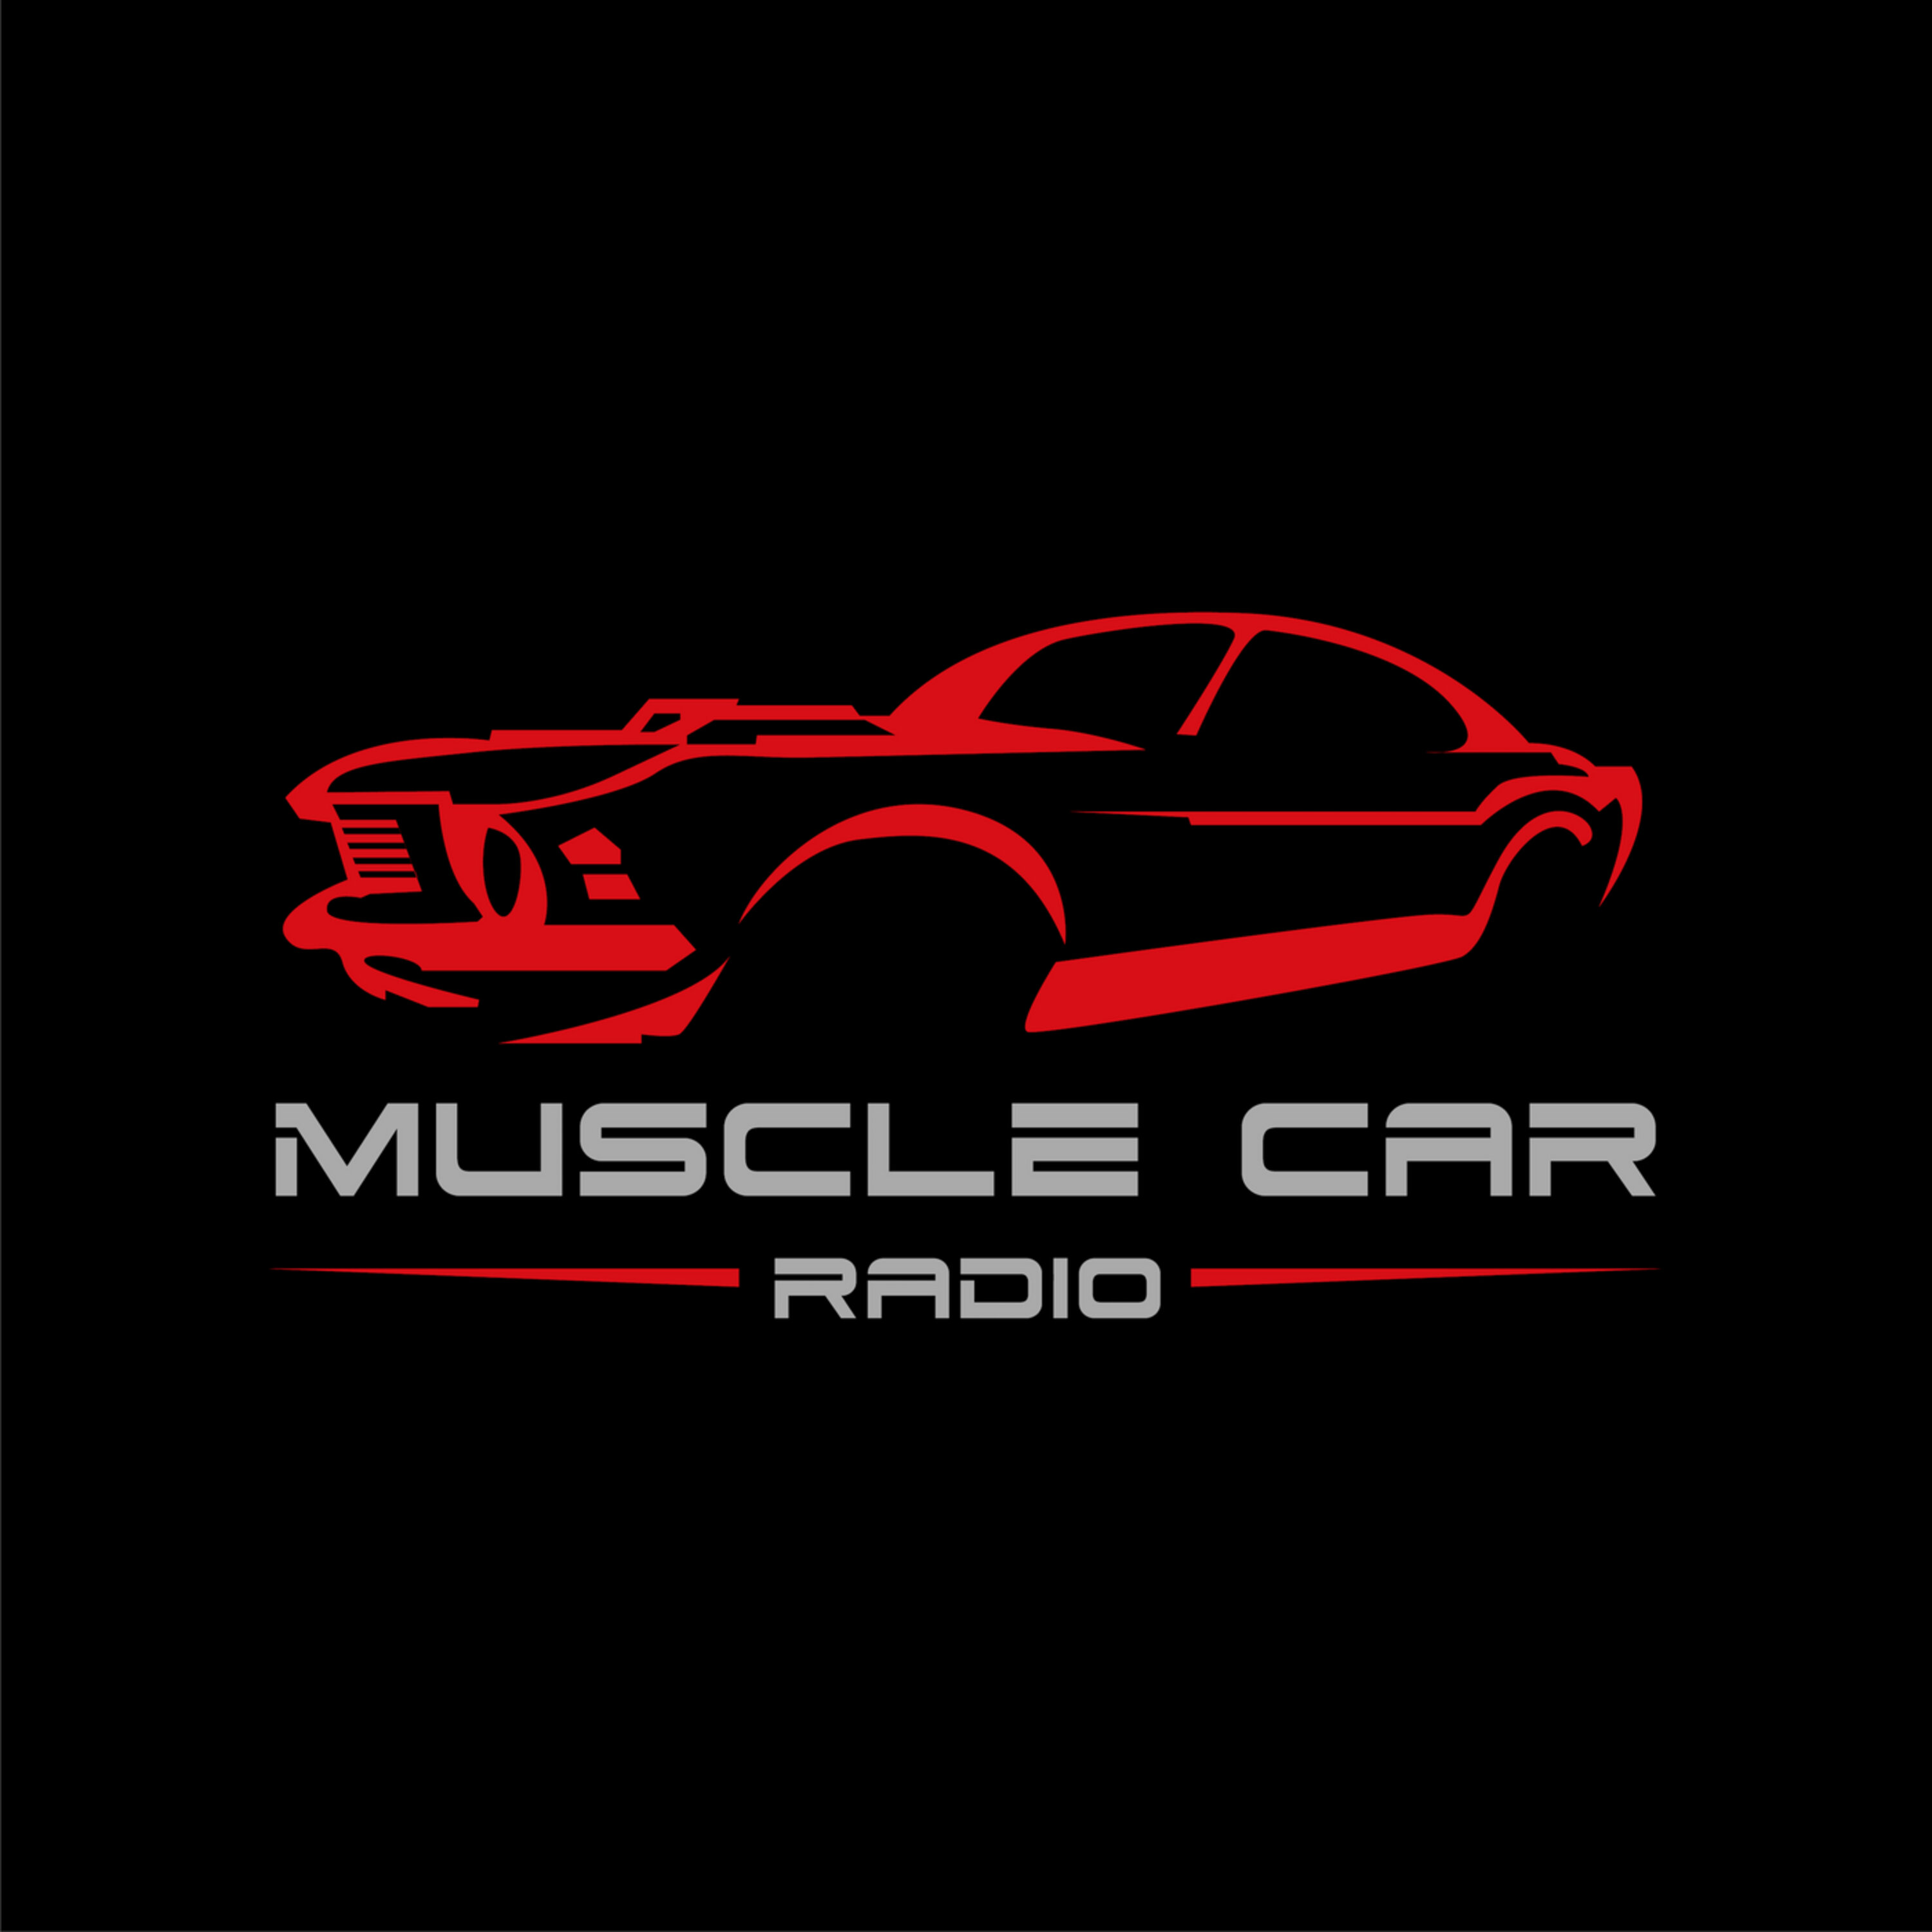 New Muscle Car Club and a Malaka with Attitude..